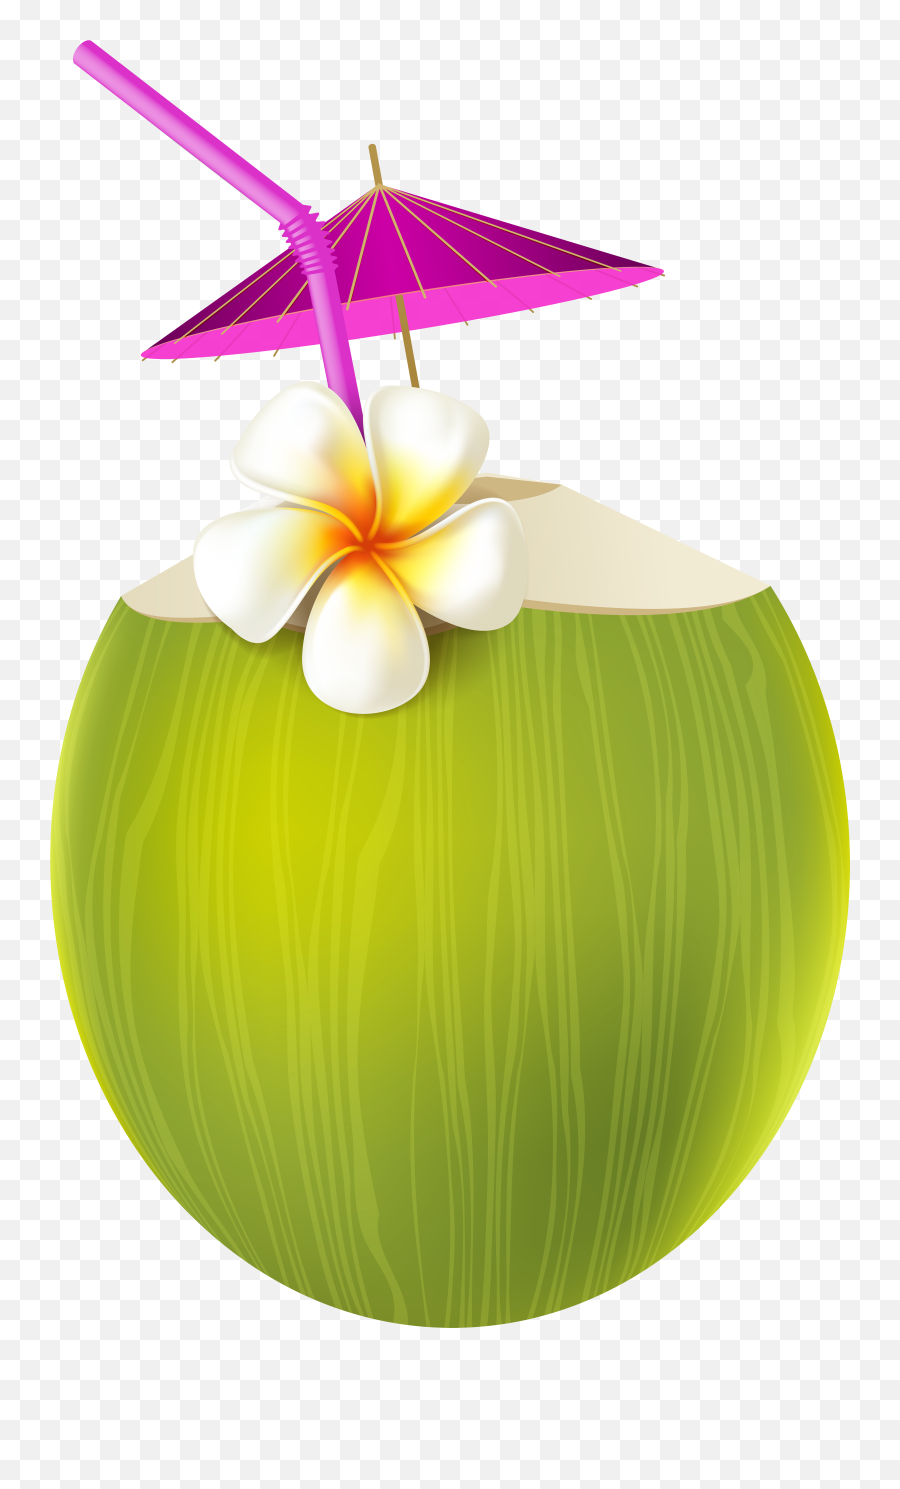 Sunglasses Clipart Party Sunglasses Party Transparent Free - Coconut Png Green Emoji,Palm Tree Drink Emoji